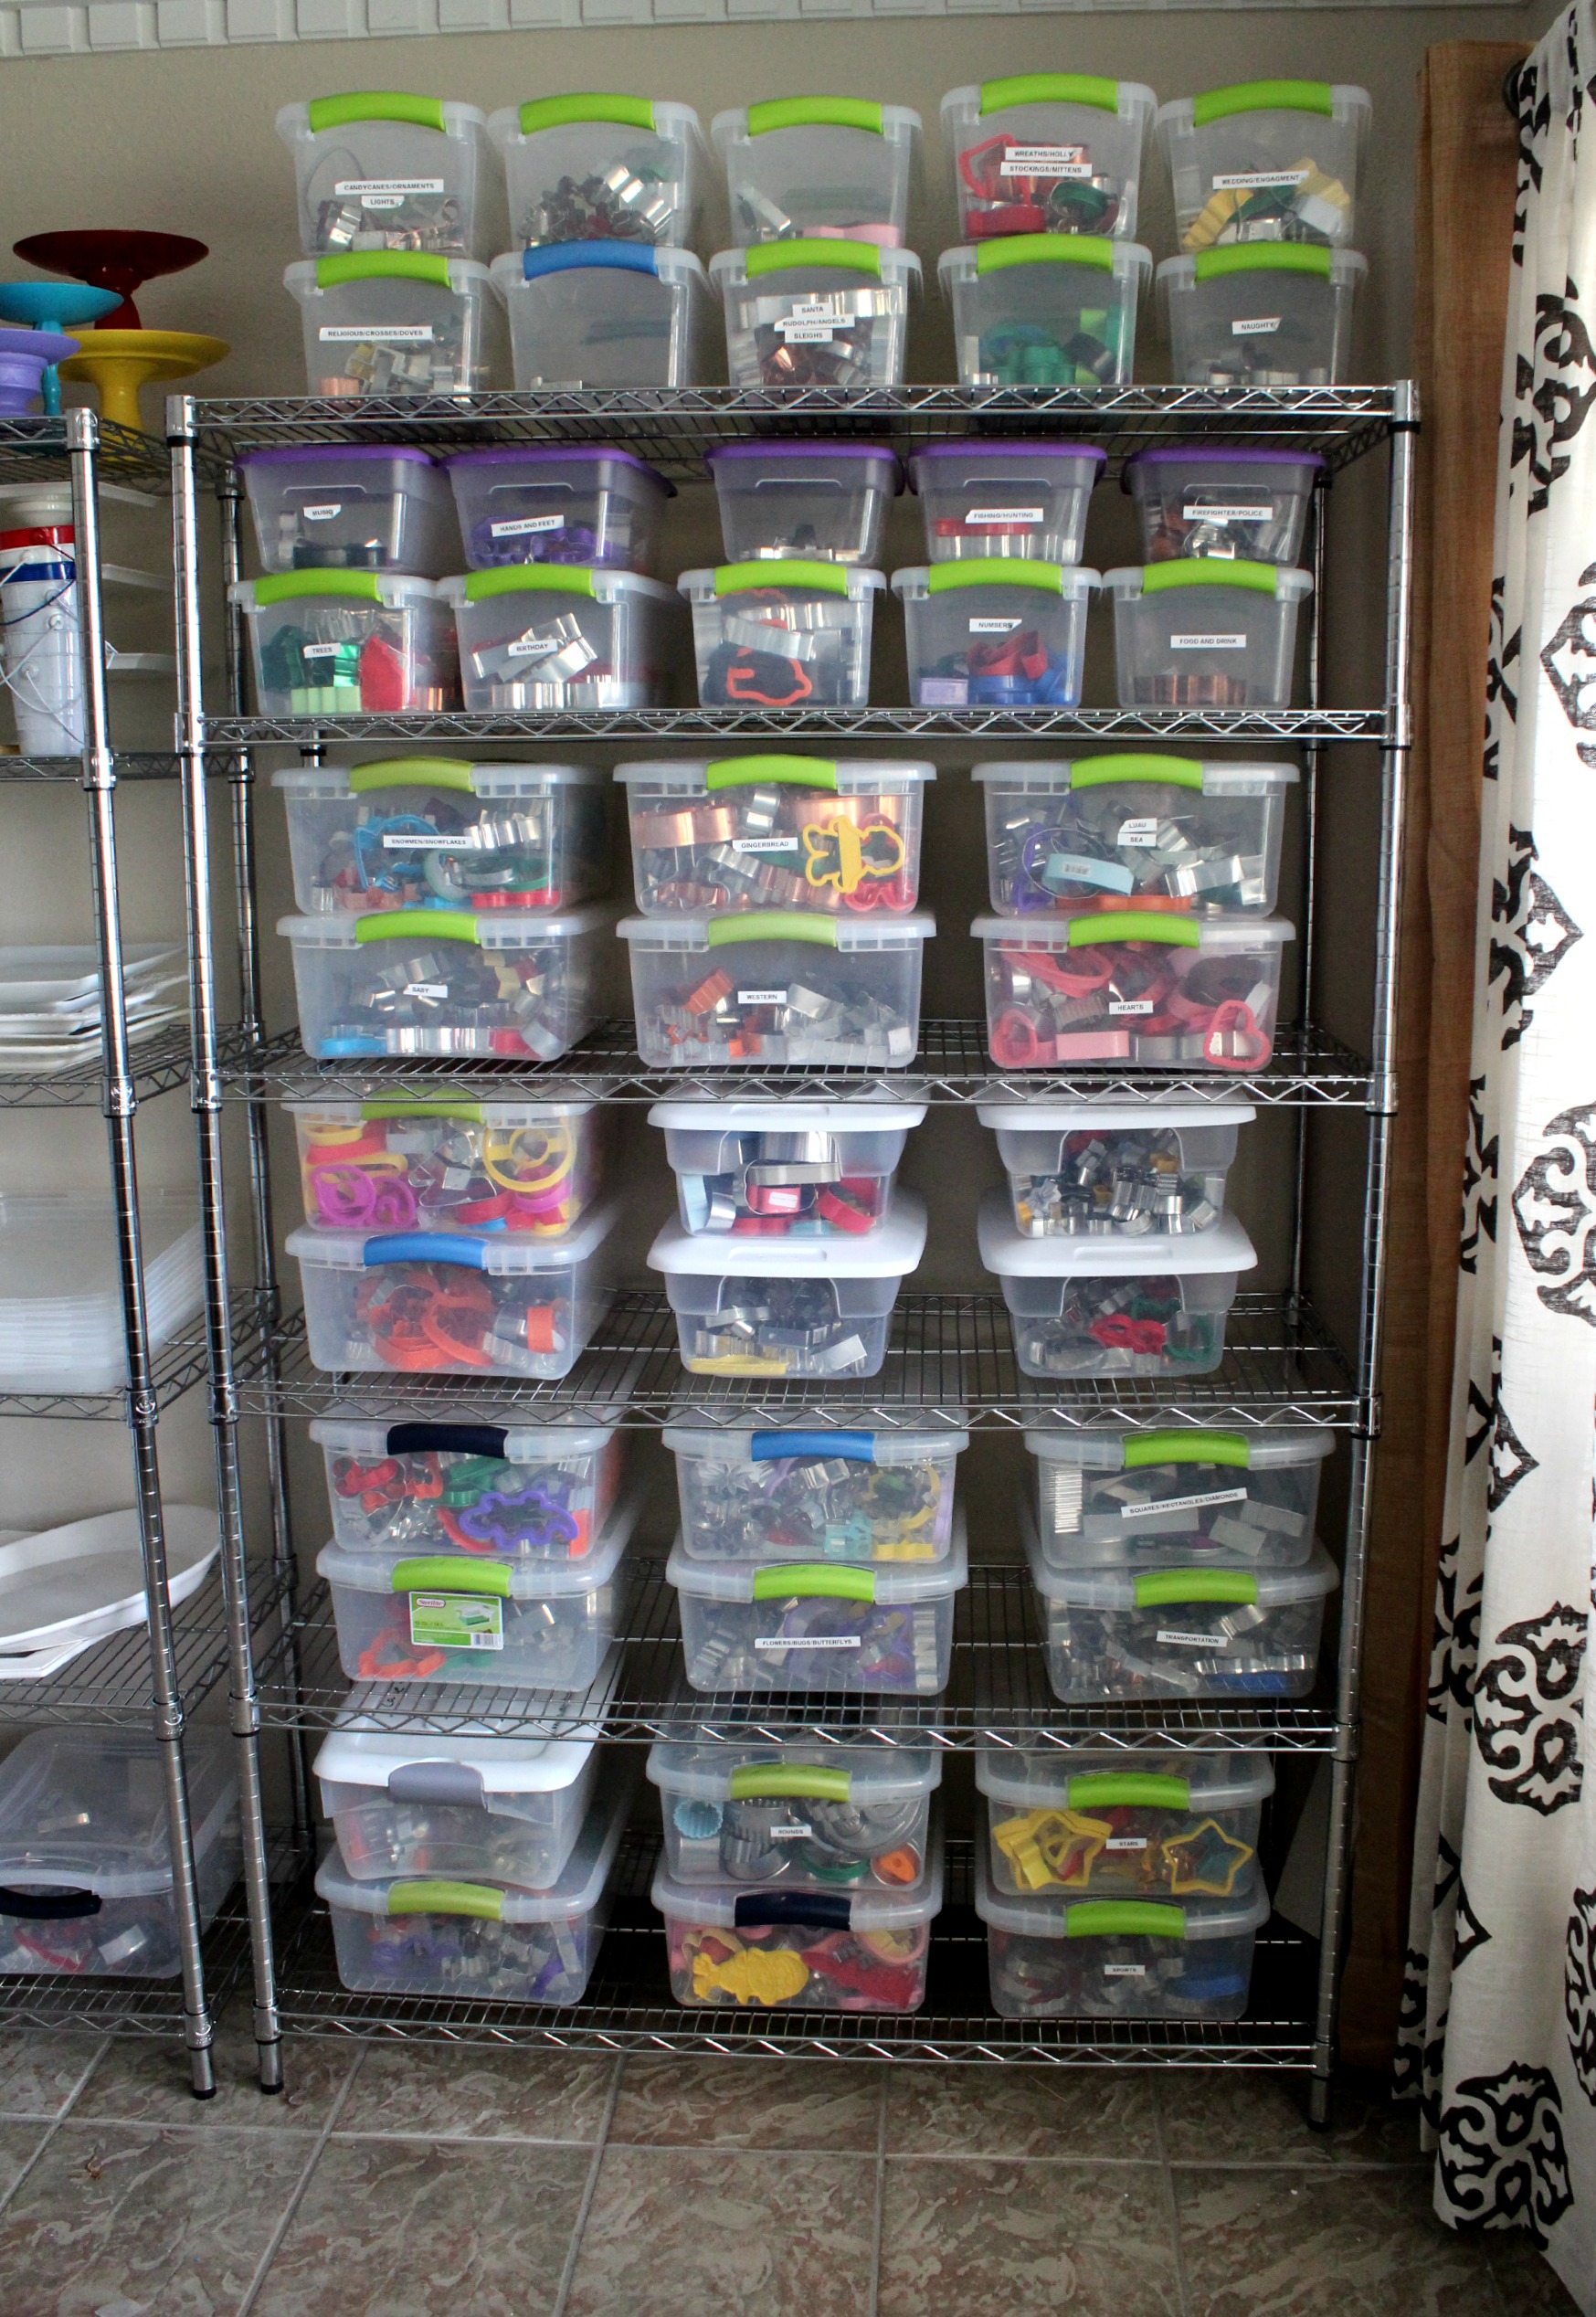 The Best Way to Organize Your Cookie Cutter Collection